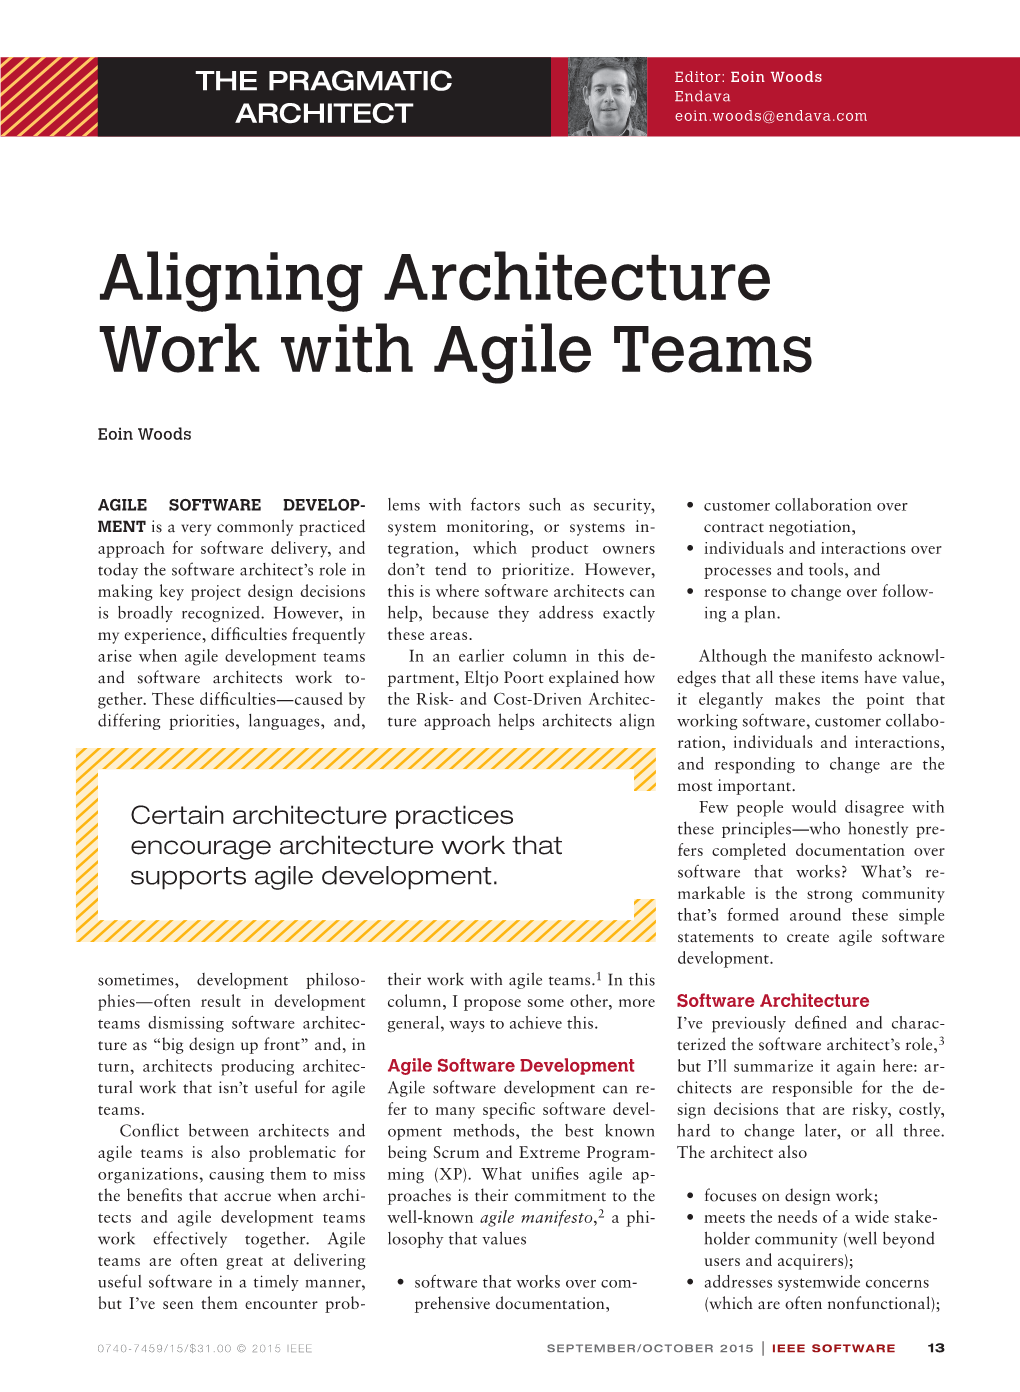 Aligning Architecture Work with Agile Teams